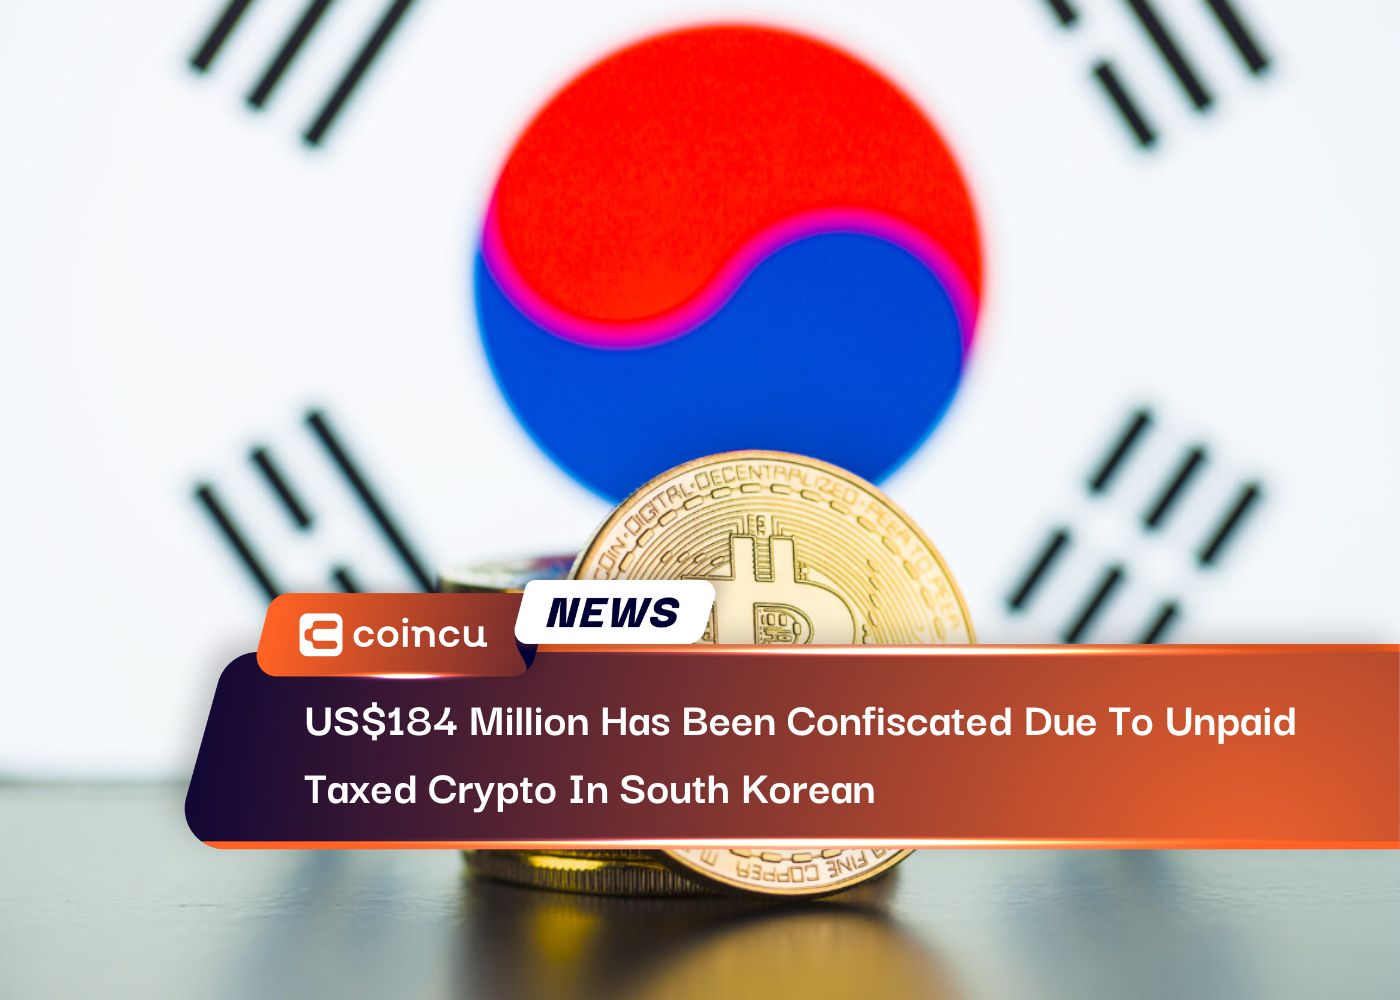 US$184 Million Has Been Confiscated Due To Unpaid Taxed Crypto In South Korean